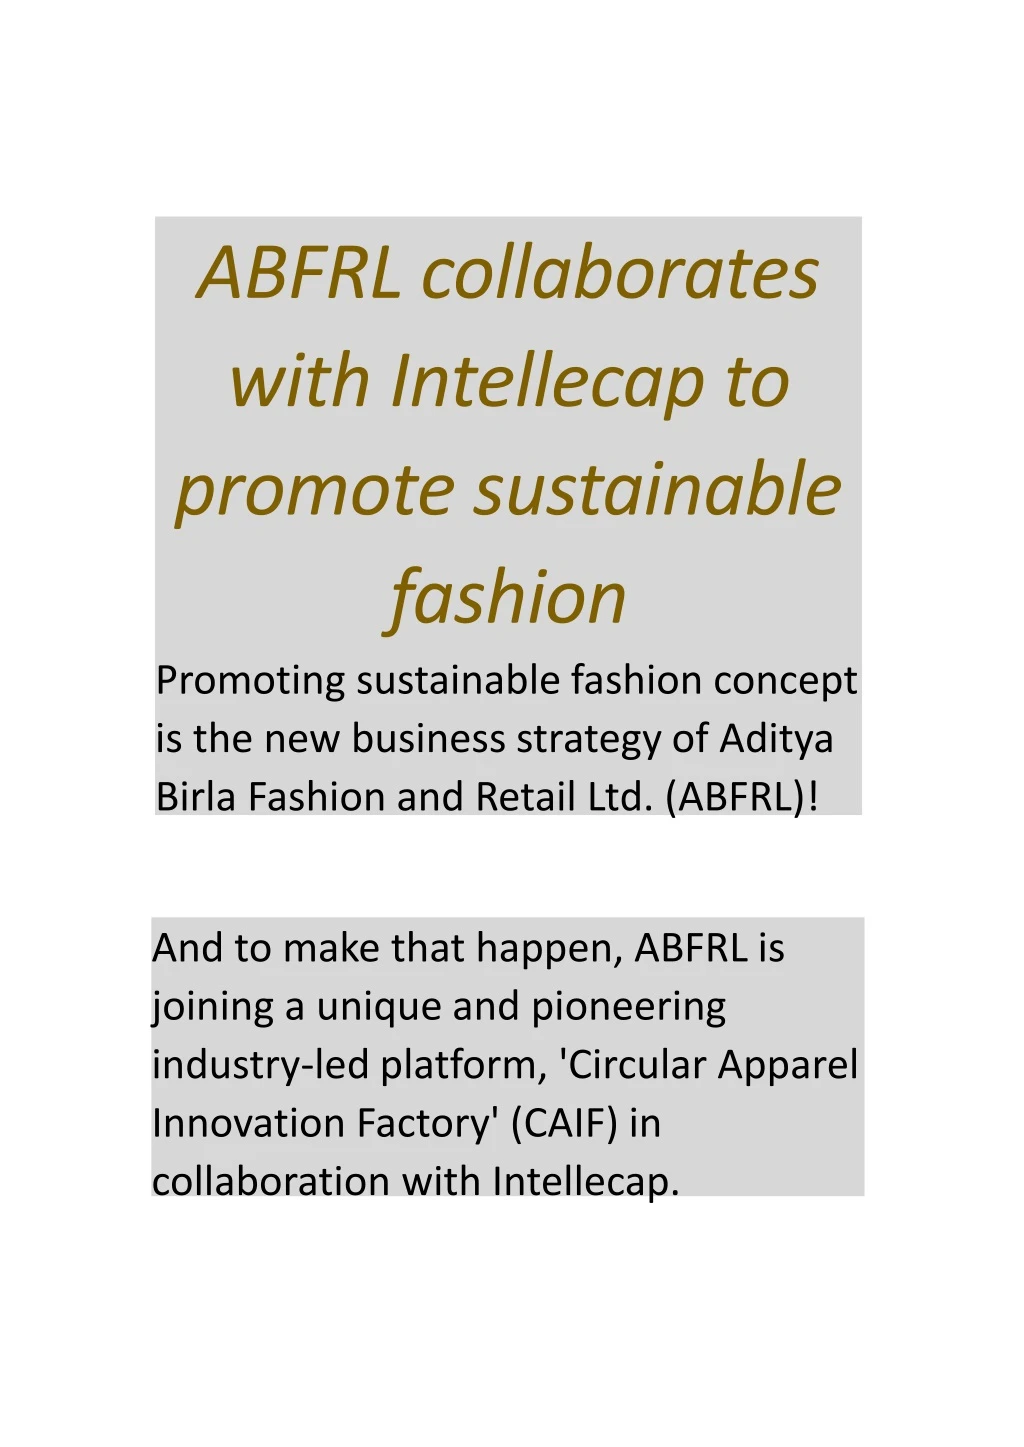 abfrl collaborates with intellecap to promote